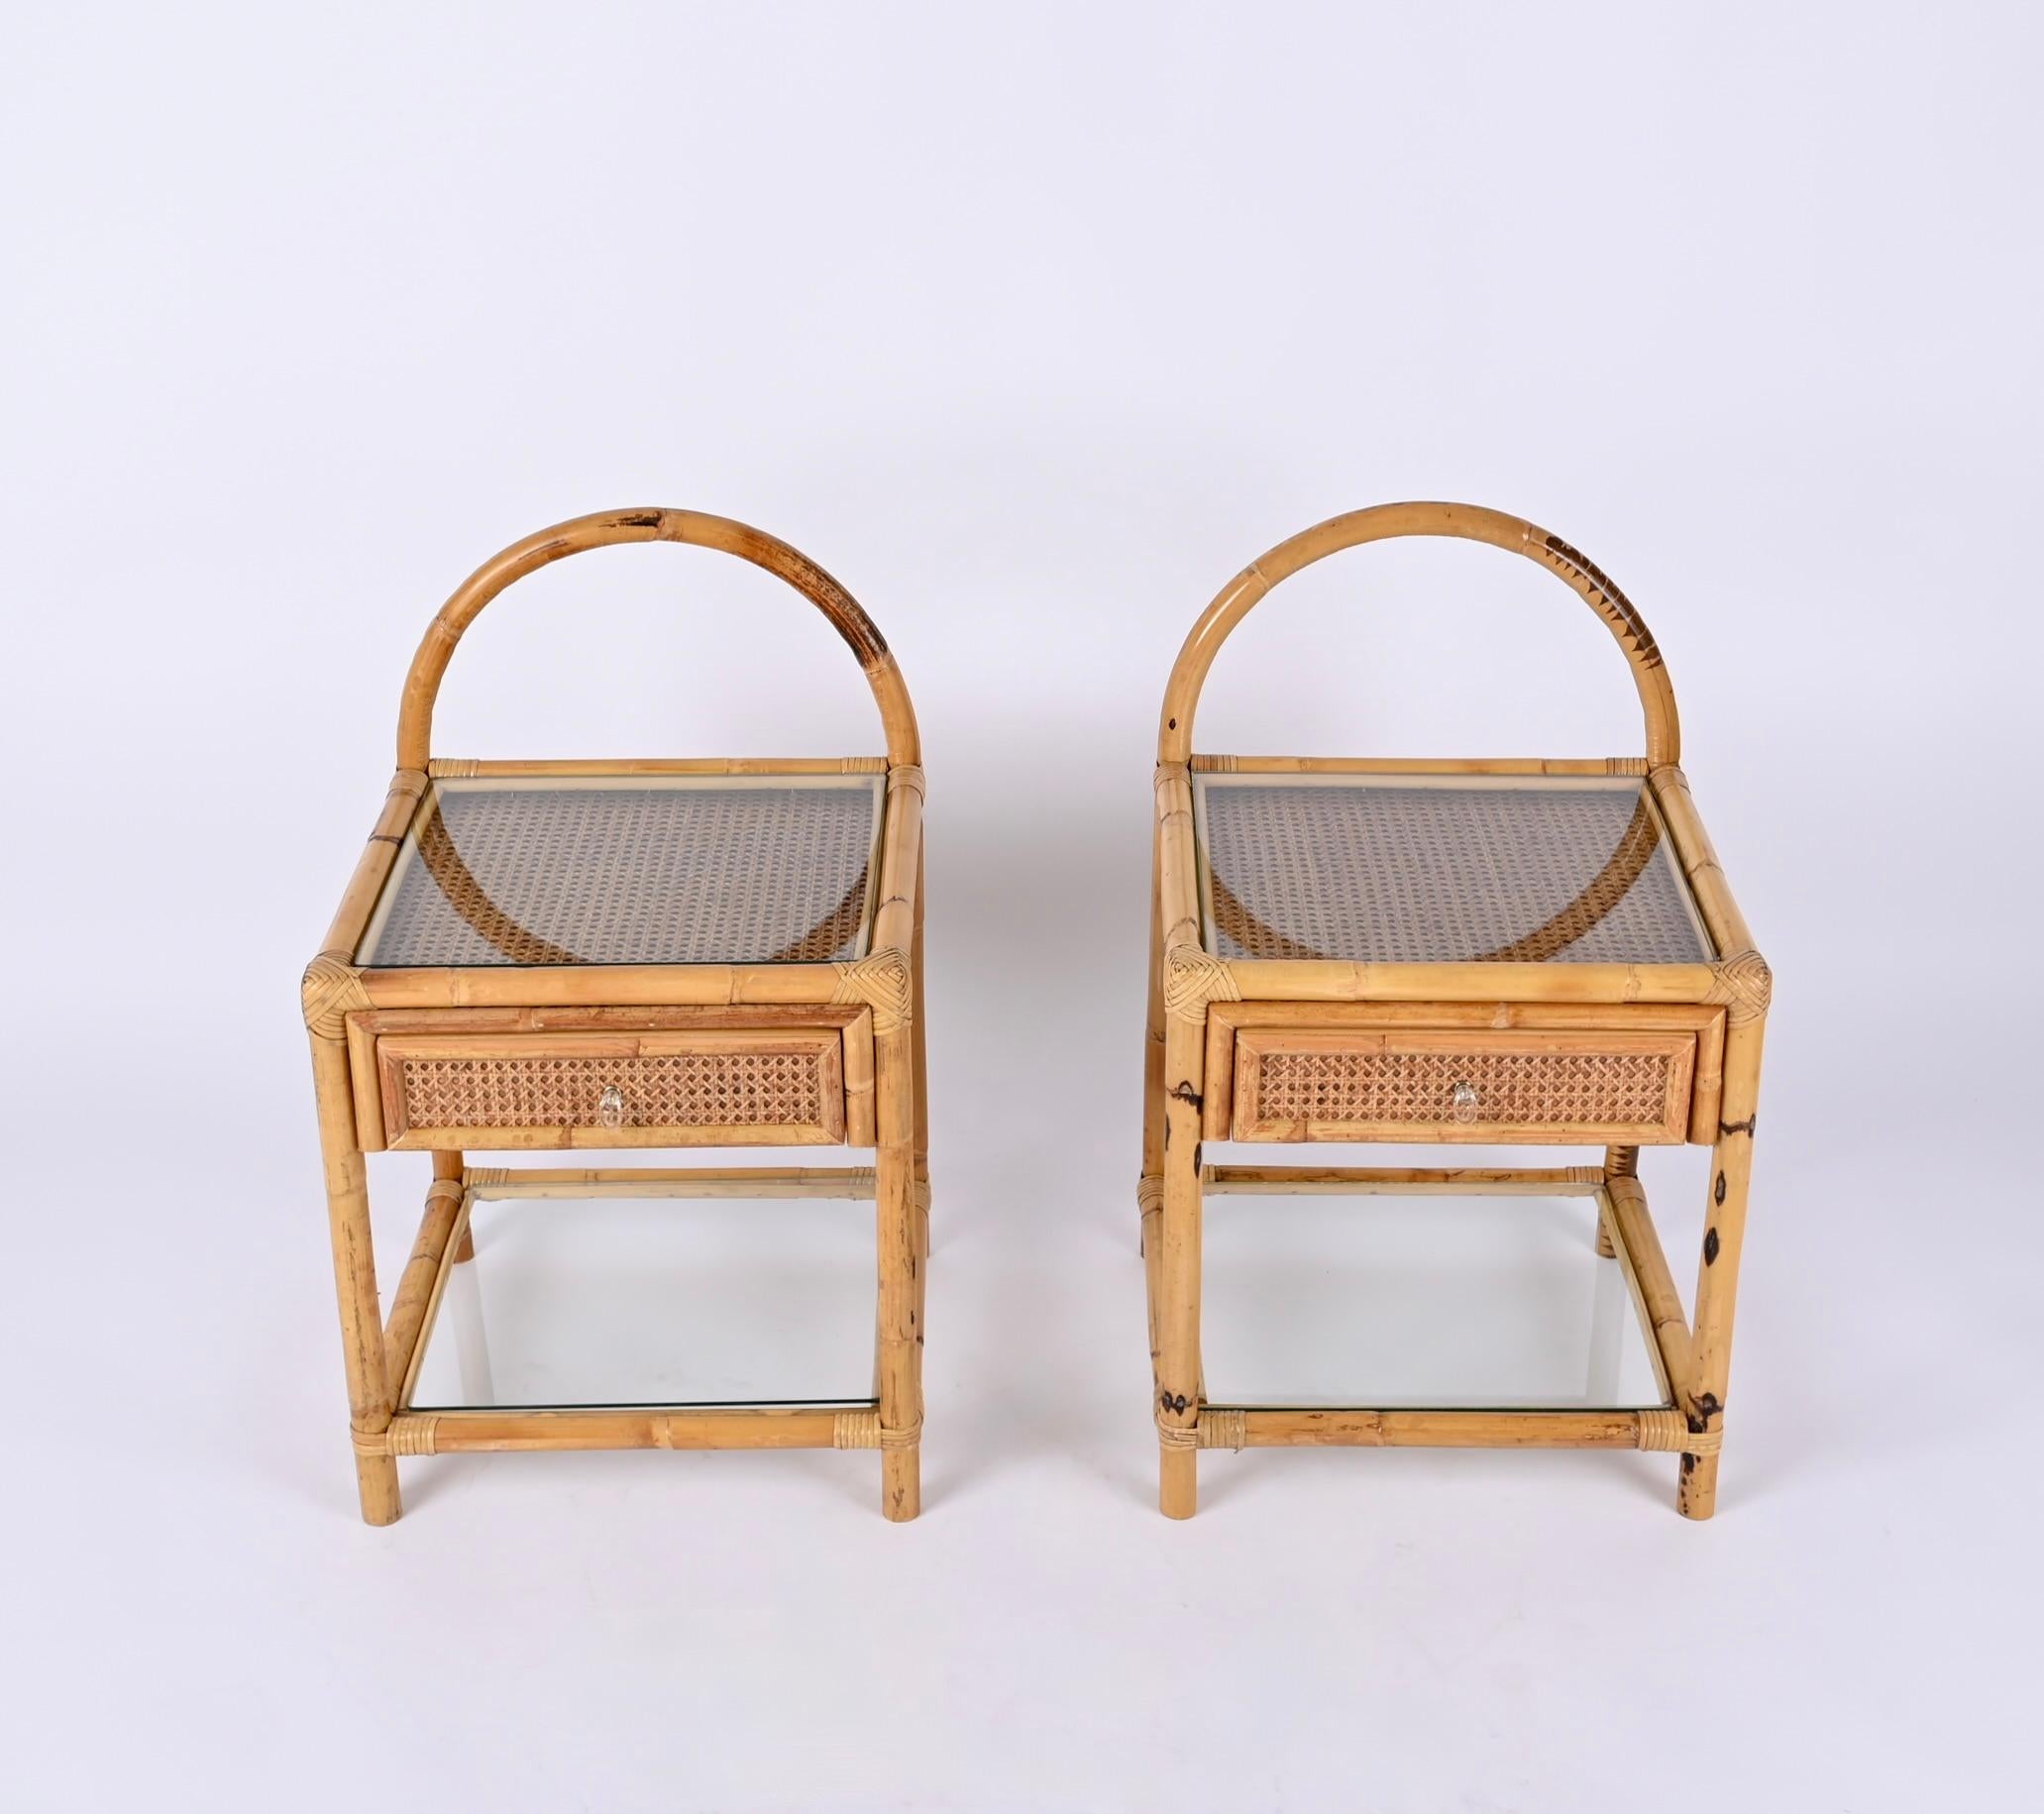 Pair of Mid-Century Bamboo, Rattan and Wicker Italian Bedside Tables, 1970s For Sale 8